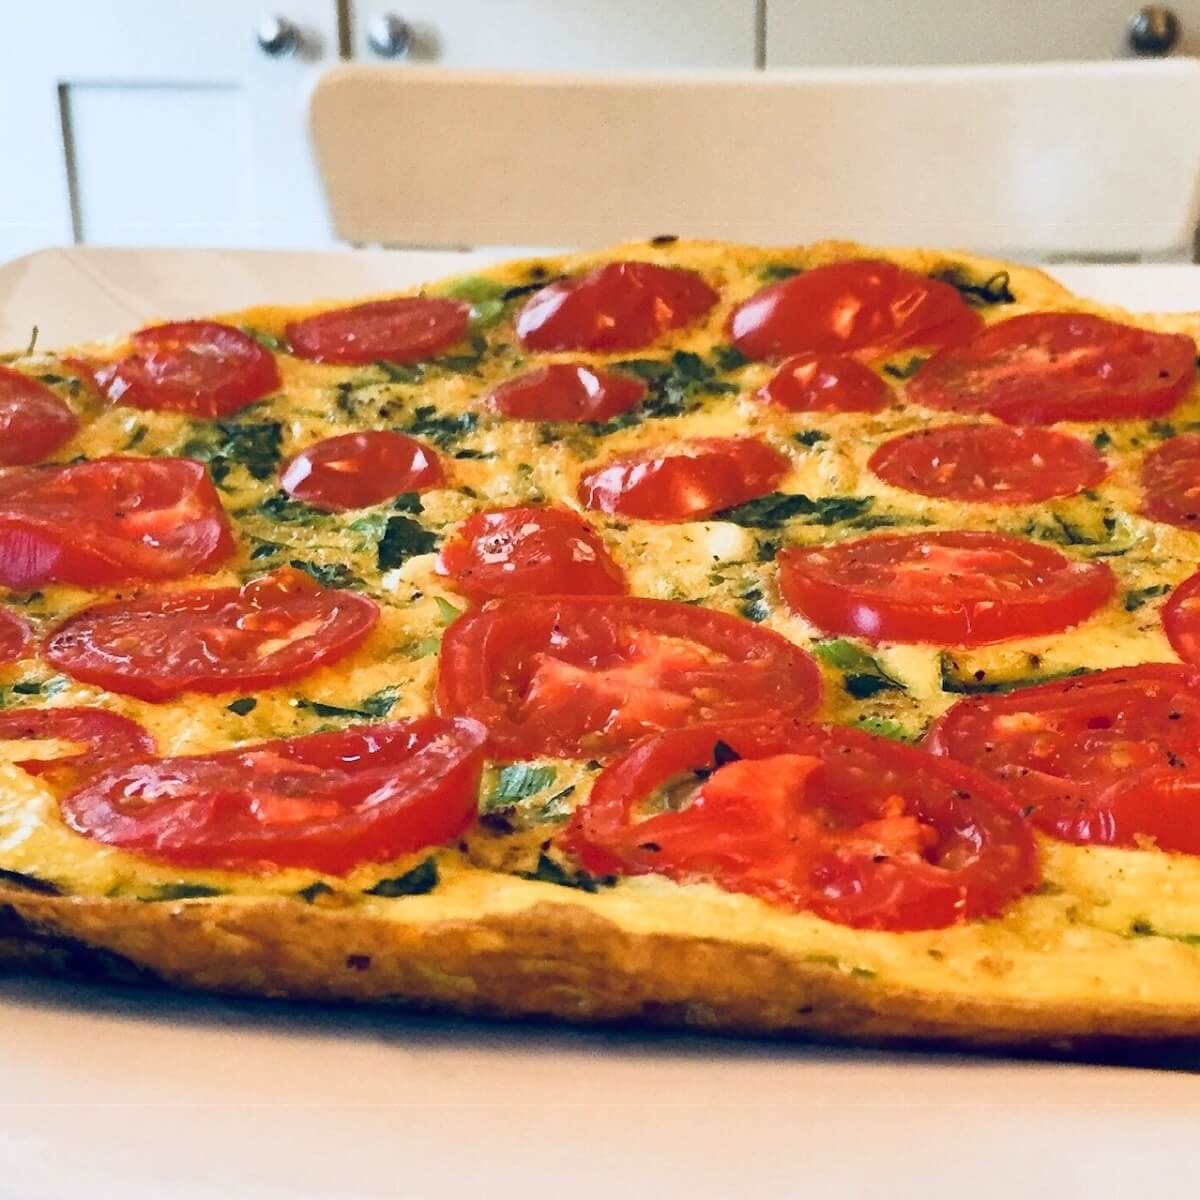 A large, round, dairy free frittata on a white plate.